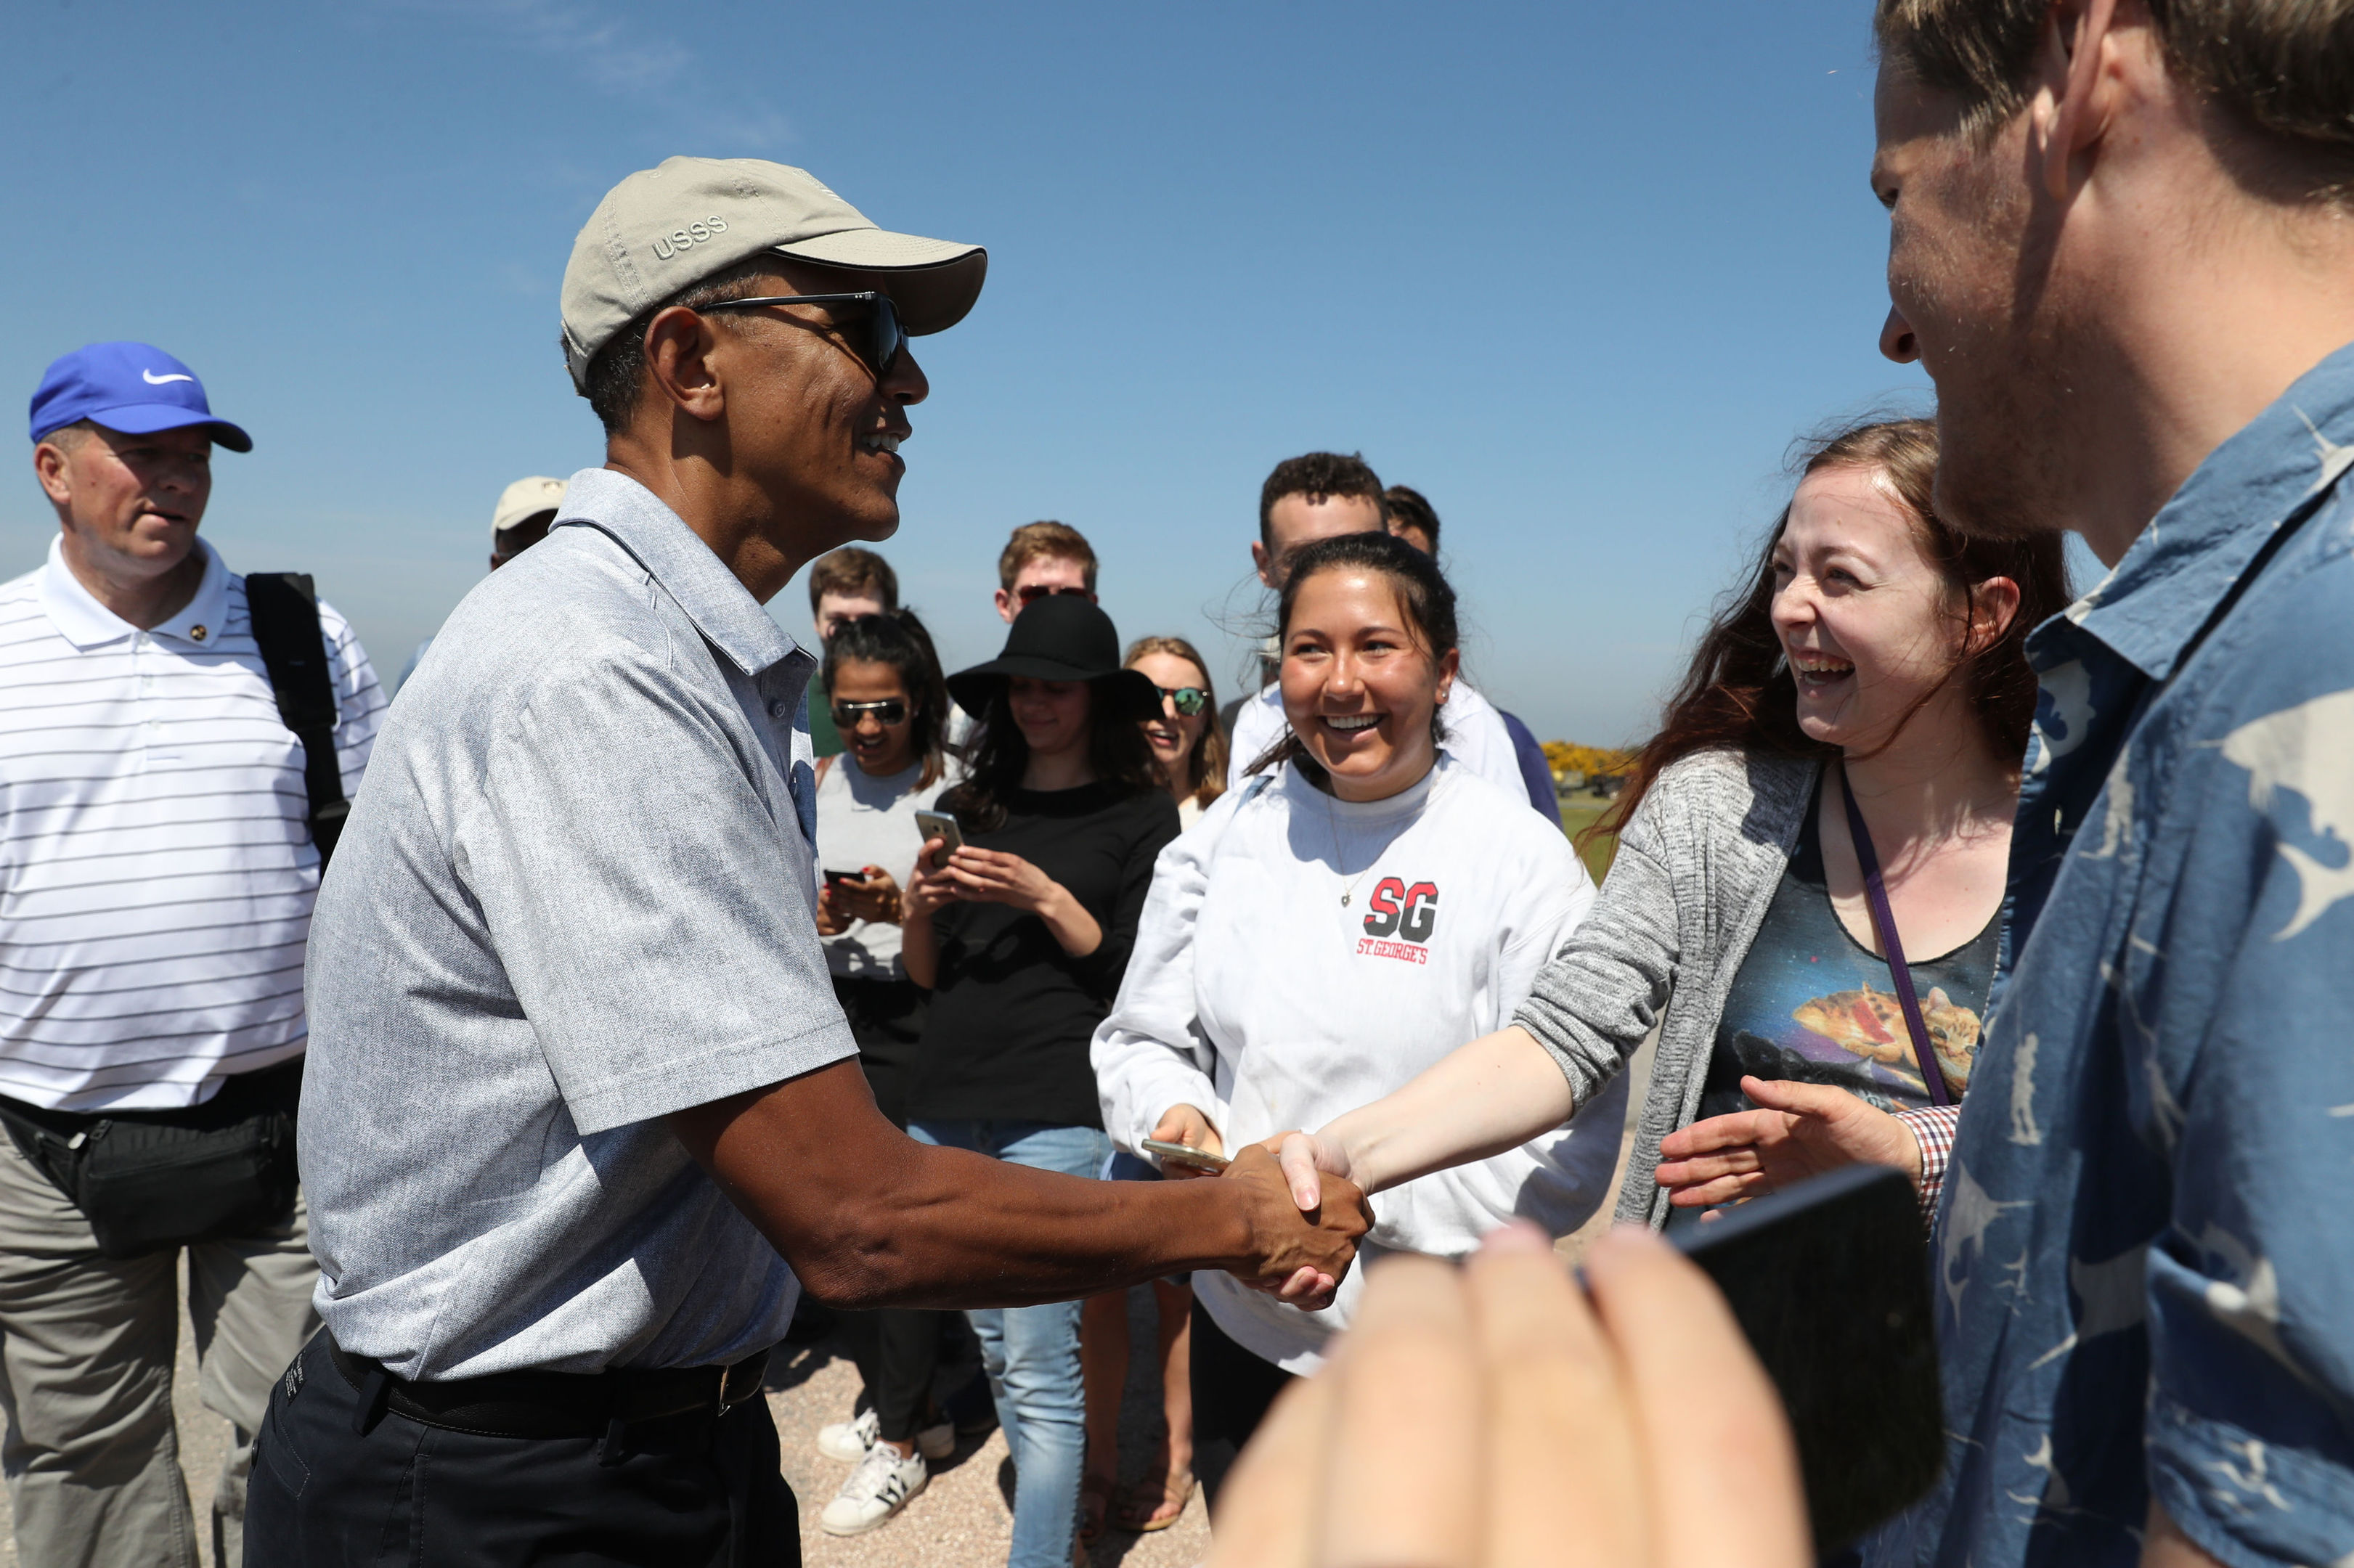 Obama mingles with the St Andrews crowd.